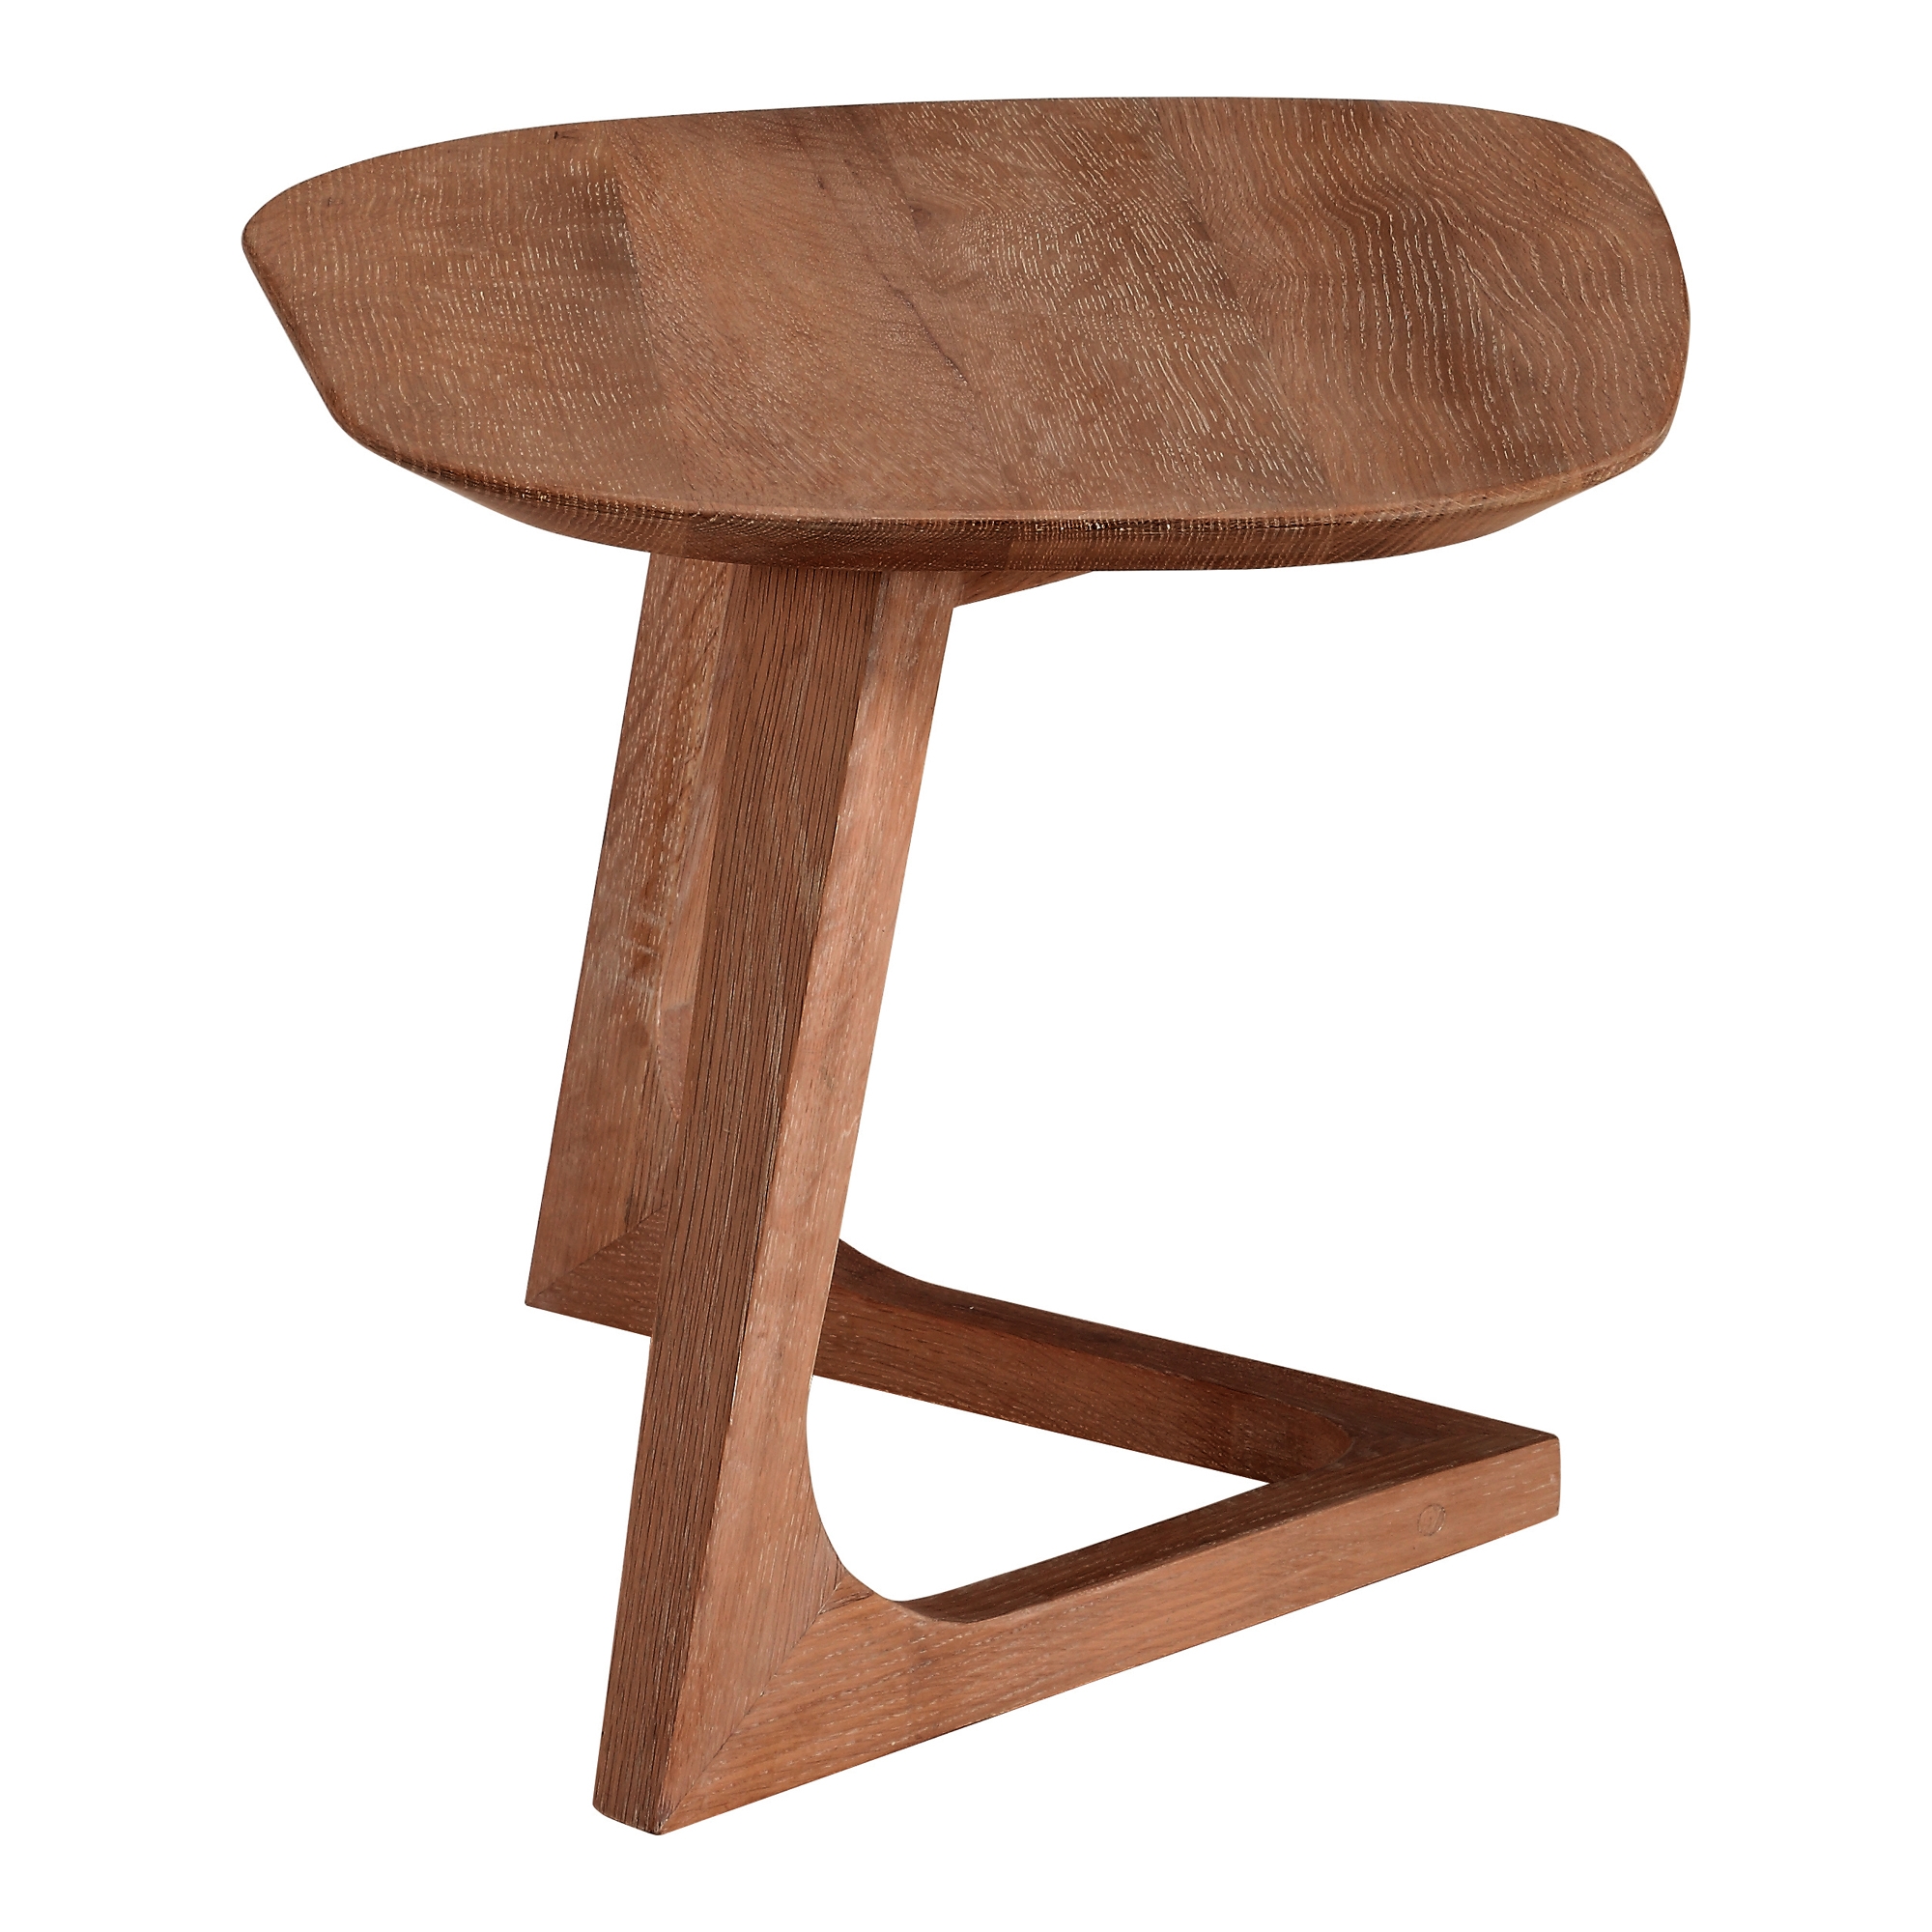 GODENZA END TABLE - Image 3